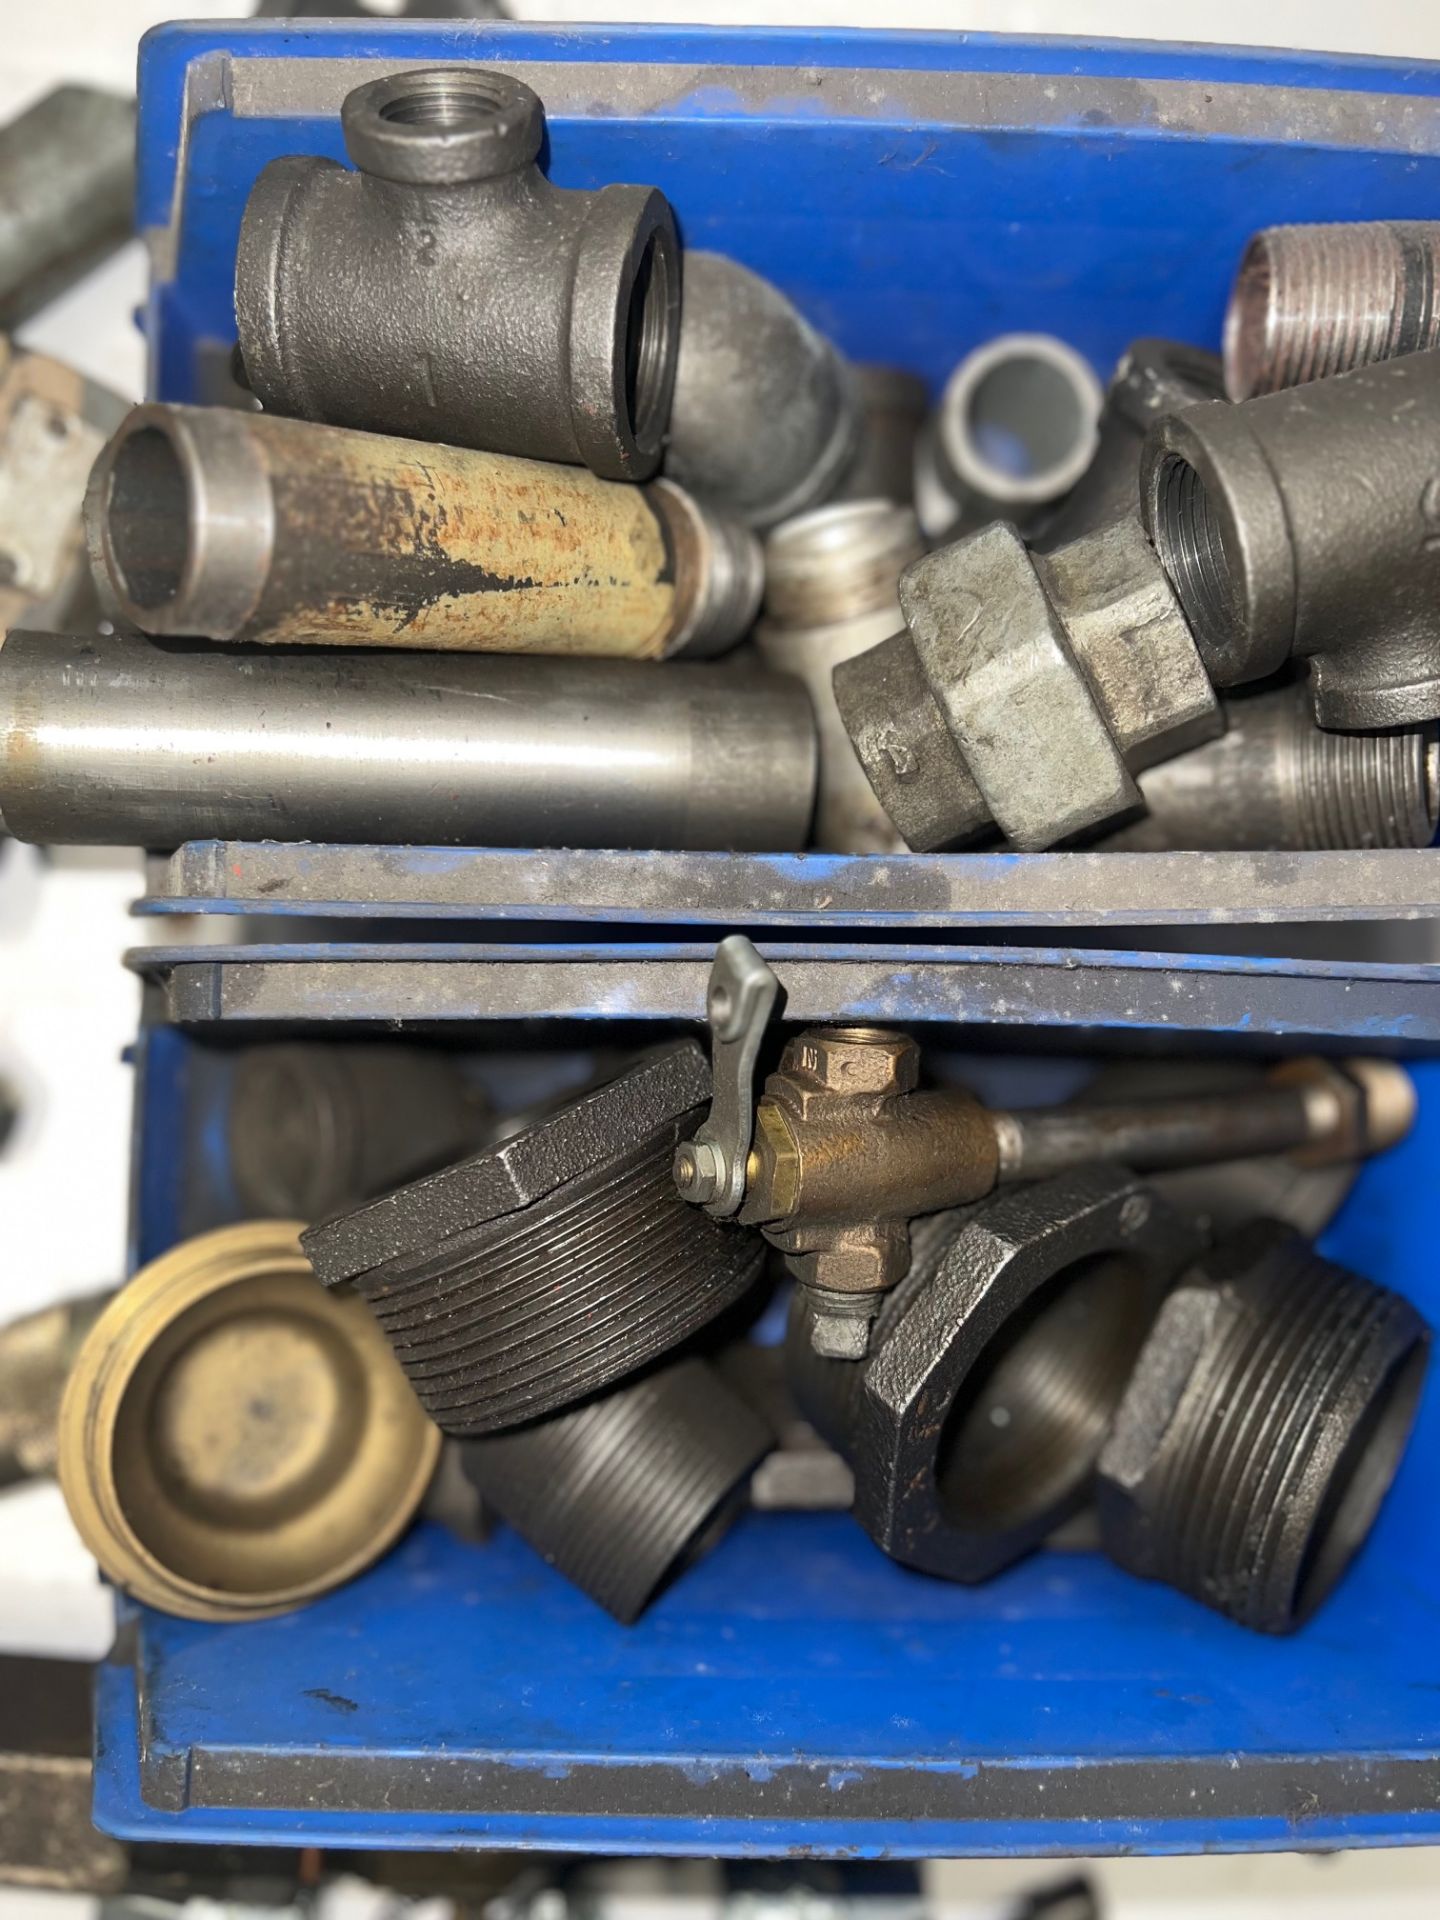 LOT/ASSORTED HYDRAULIC FITTINGS